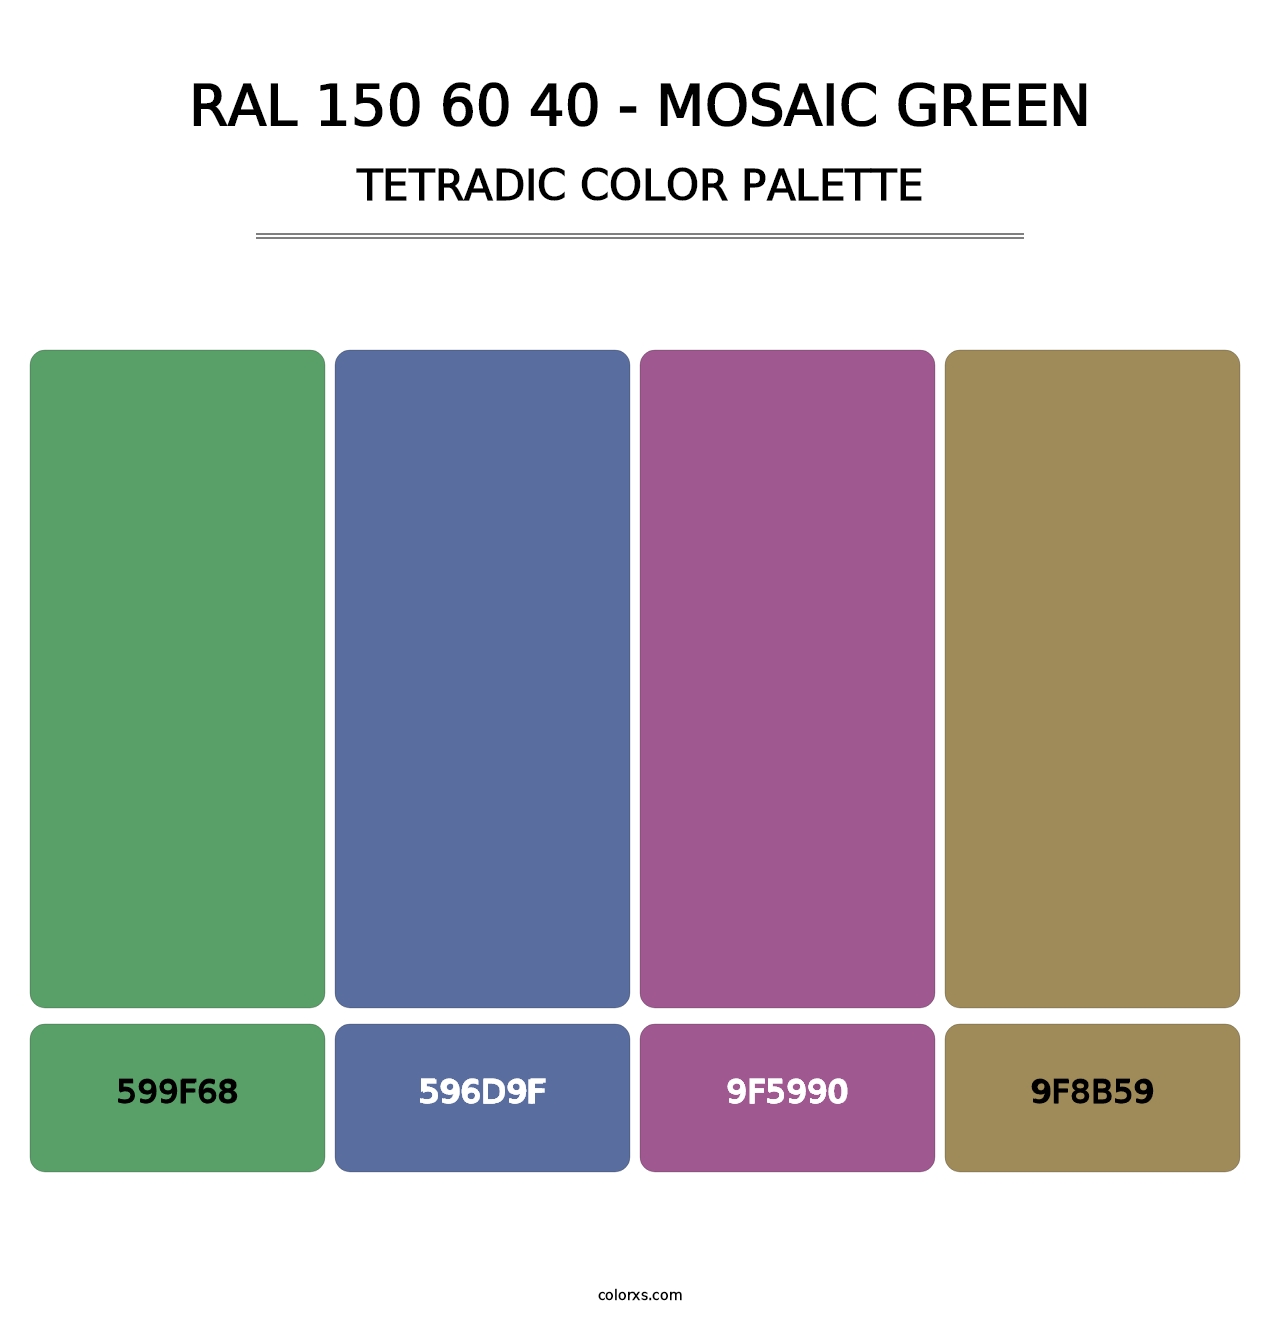 RAL 150 60 40 - Mosaic Green - Tetradic Color Palette